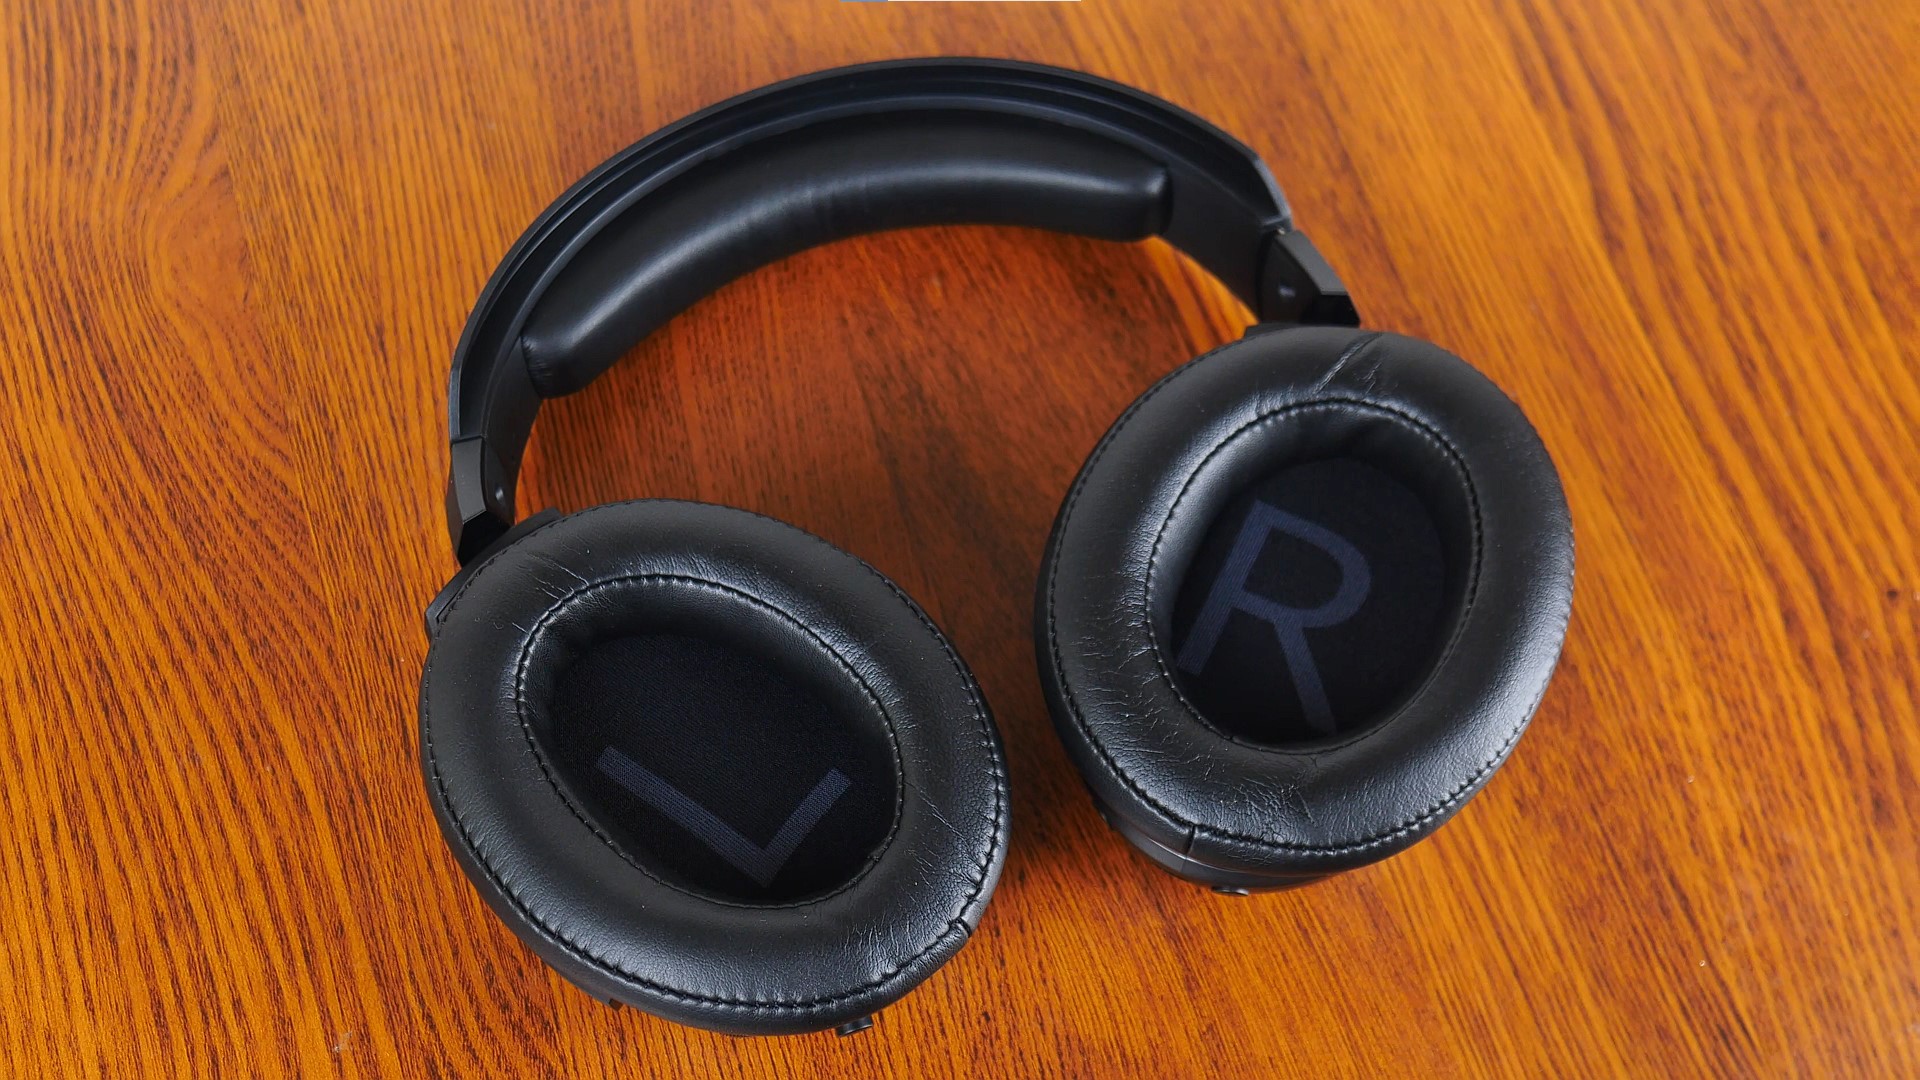 Review: Cooler Master MH670 Wireless Gaming Headset